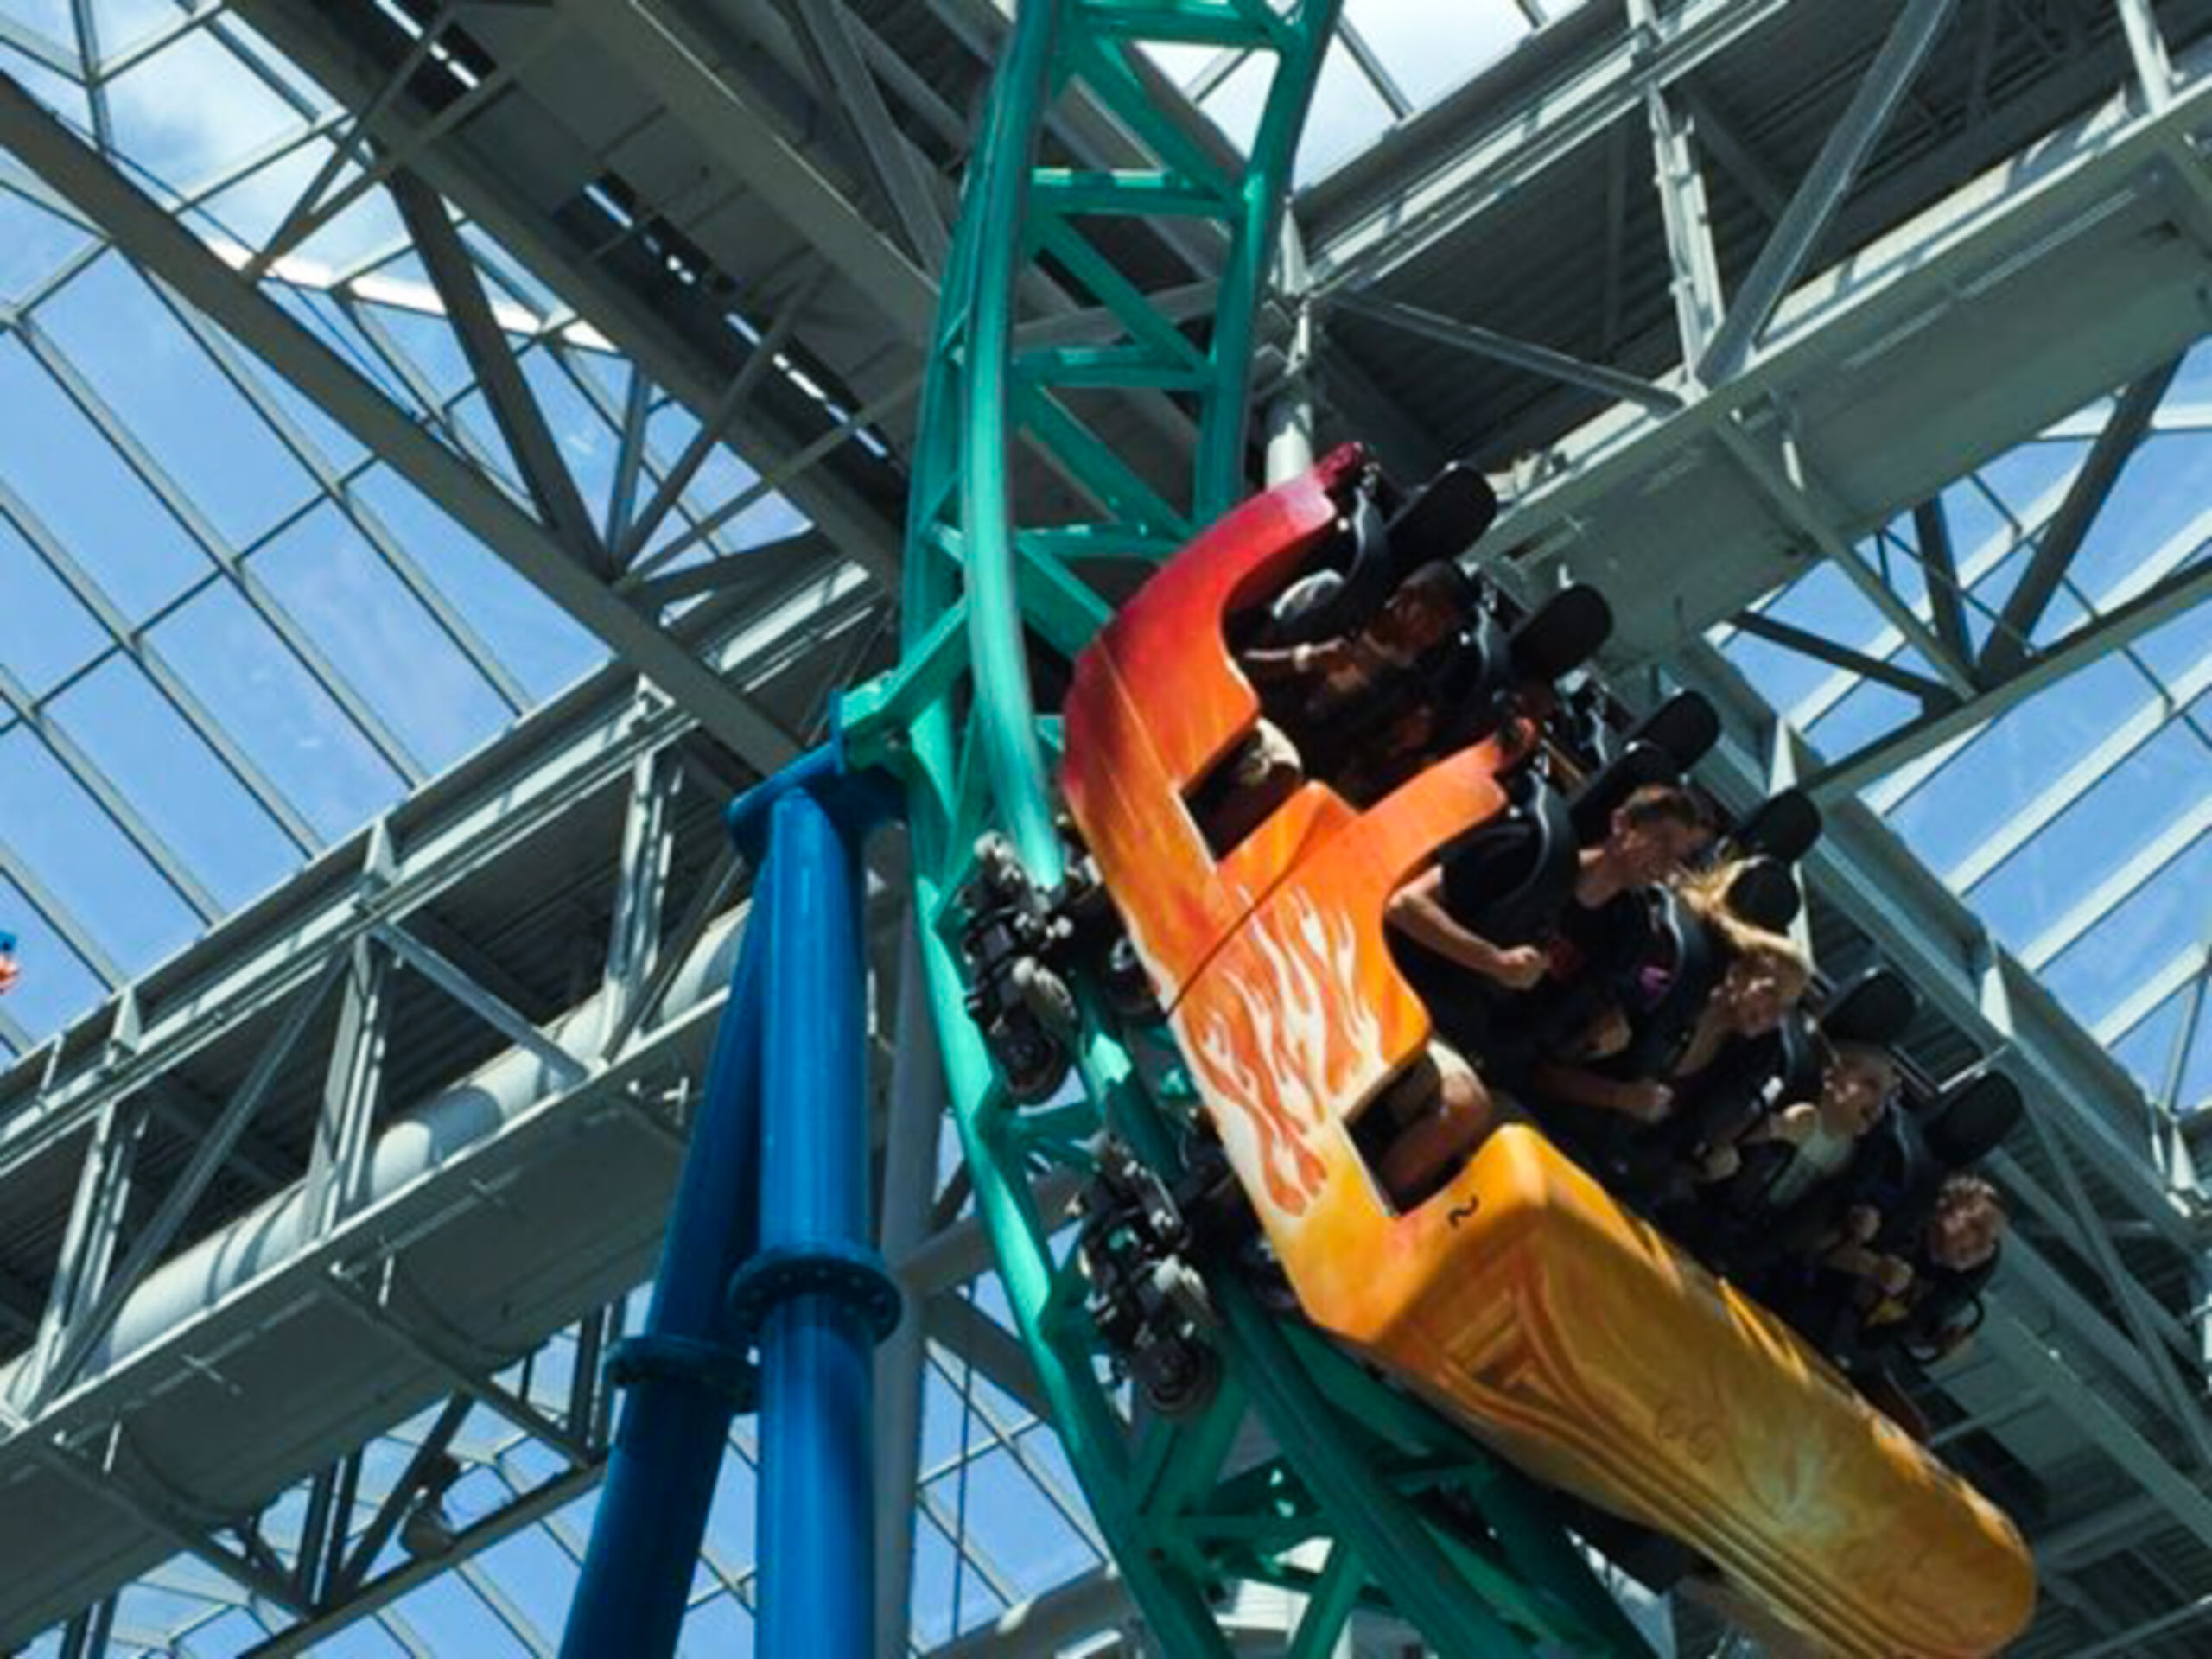 nickelodeon universe at mall of america